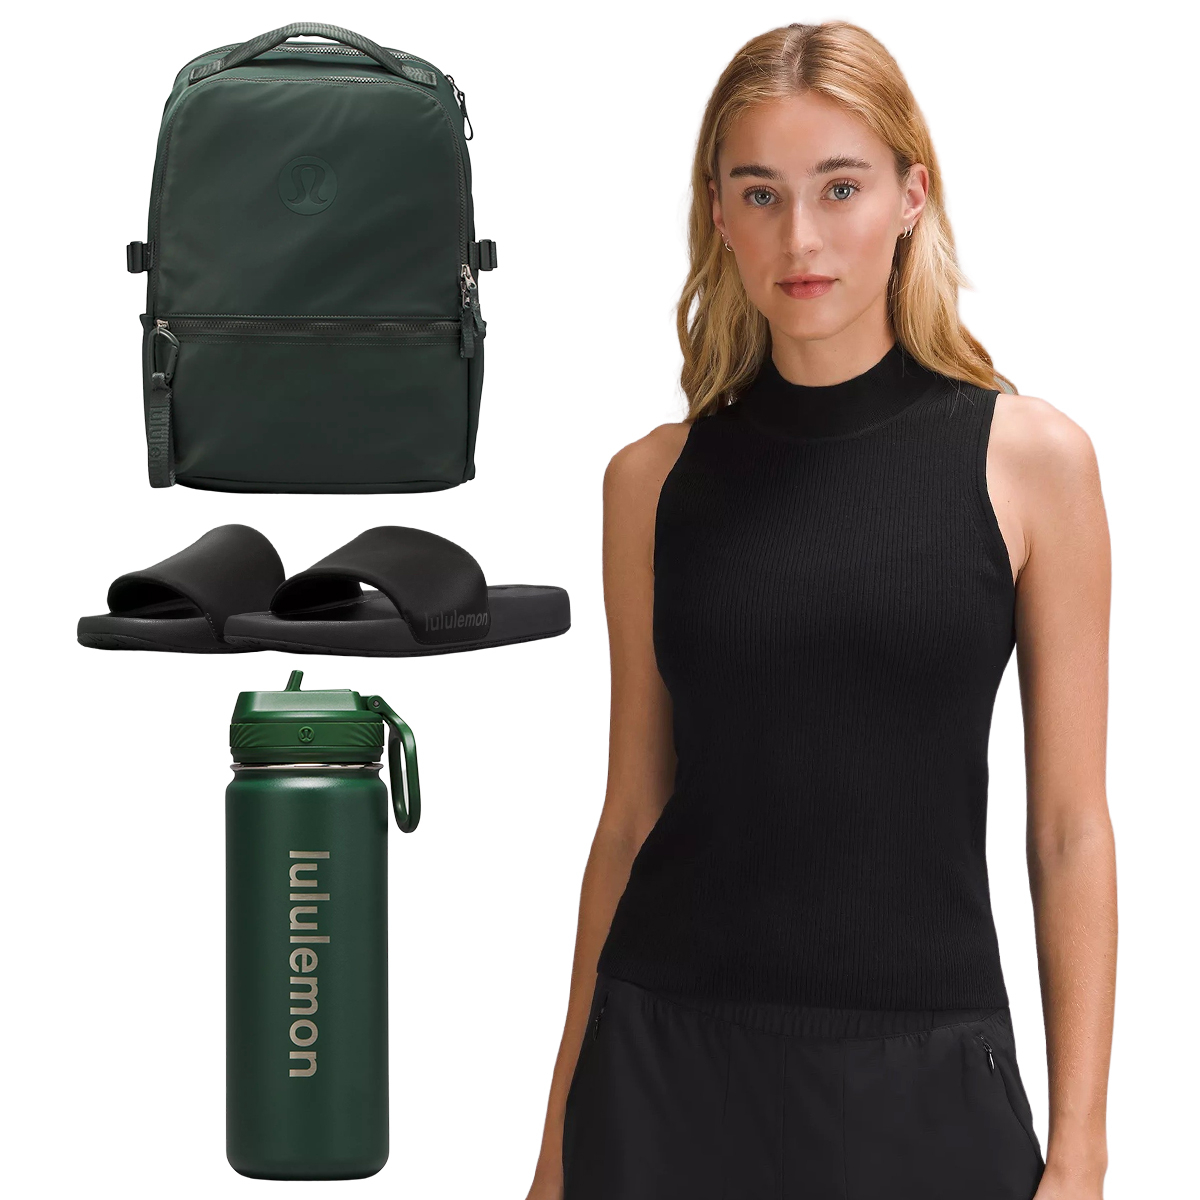 Lululemon Back-to-School Styles Under $99 Are Anything but Textbook